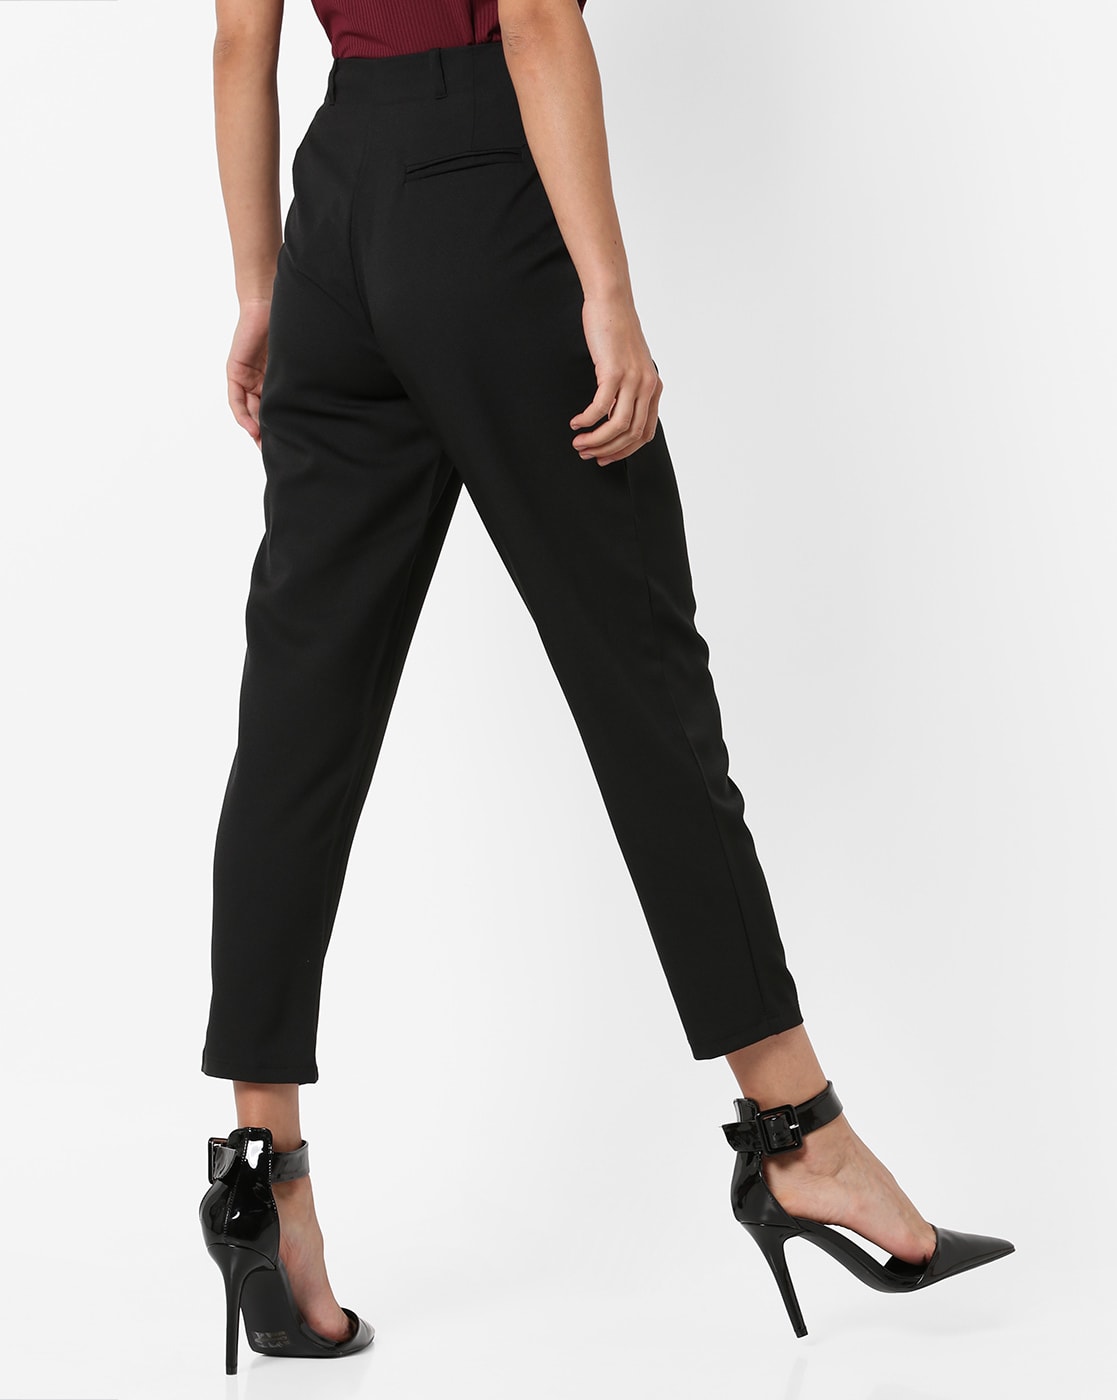 Flounce London Petite basic high waisted wide leg trousers in black | ASOS